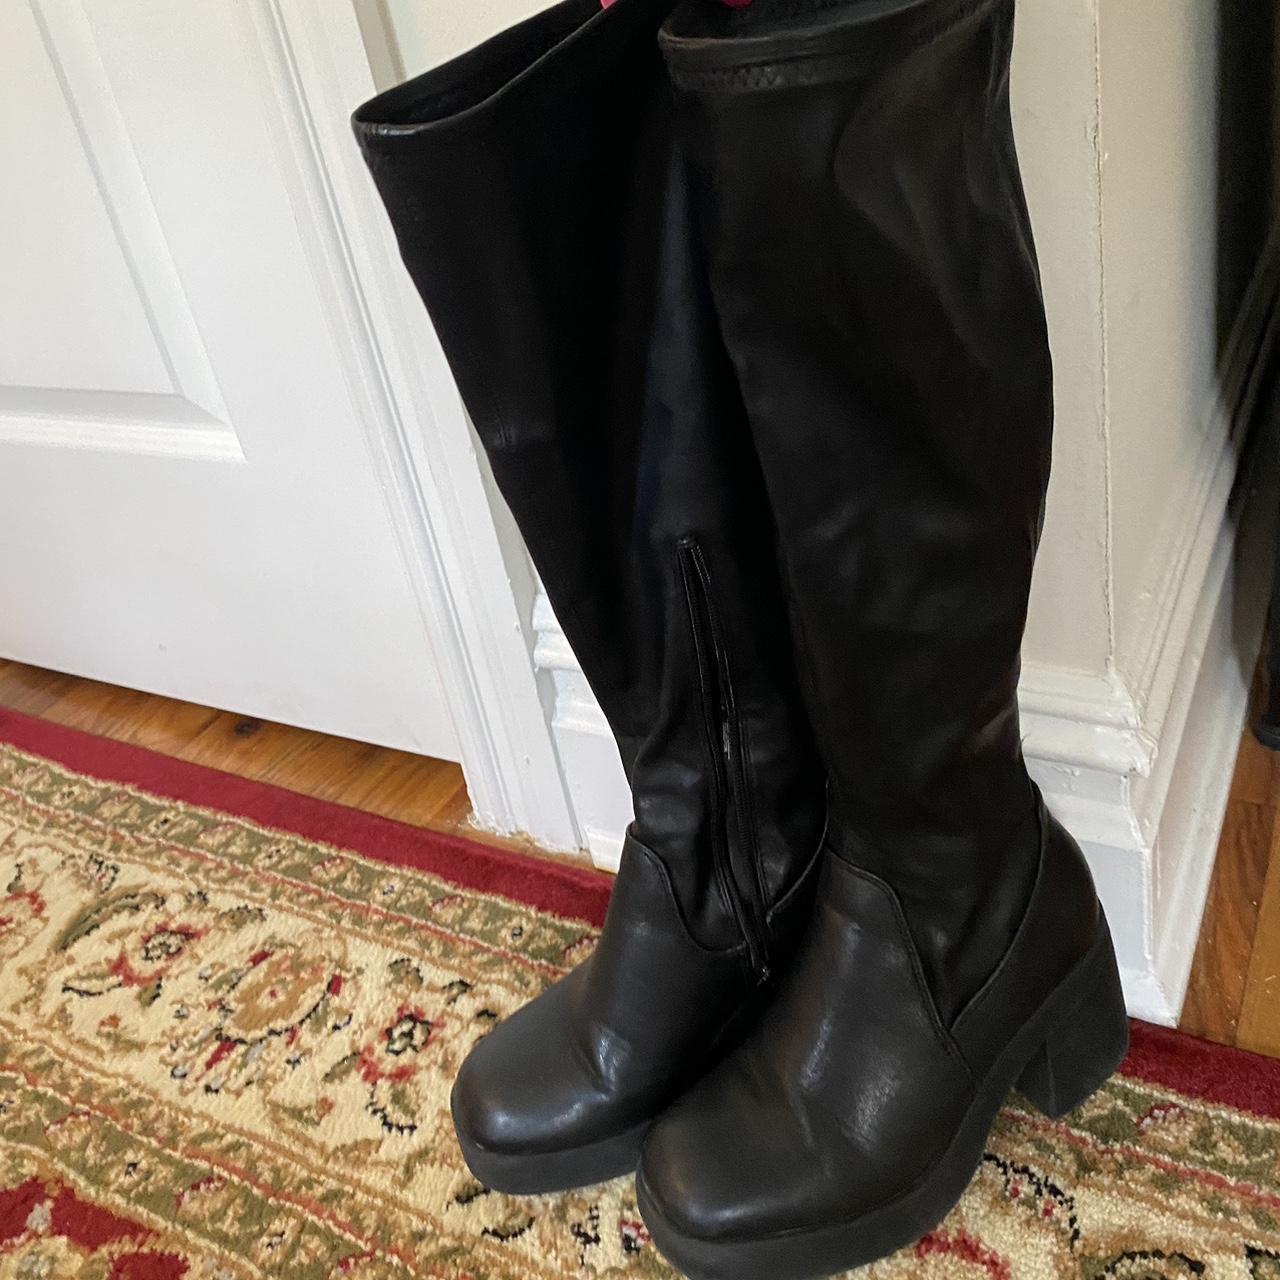 Knee high black boots, fit great around multiple... - Depop